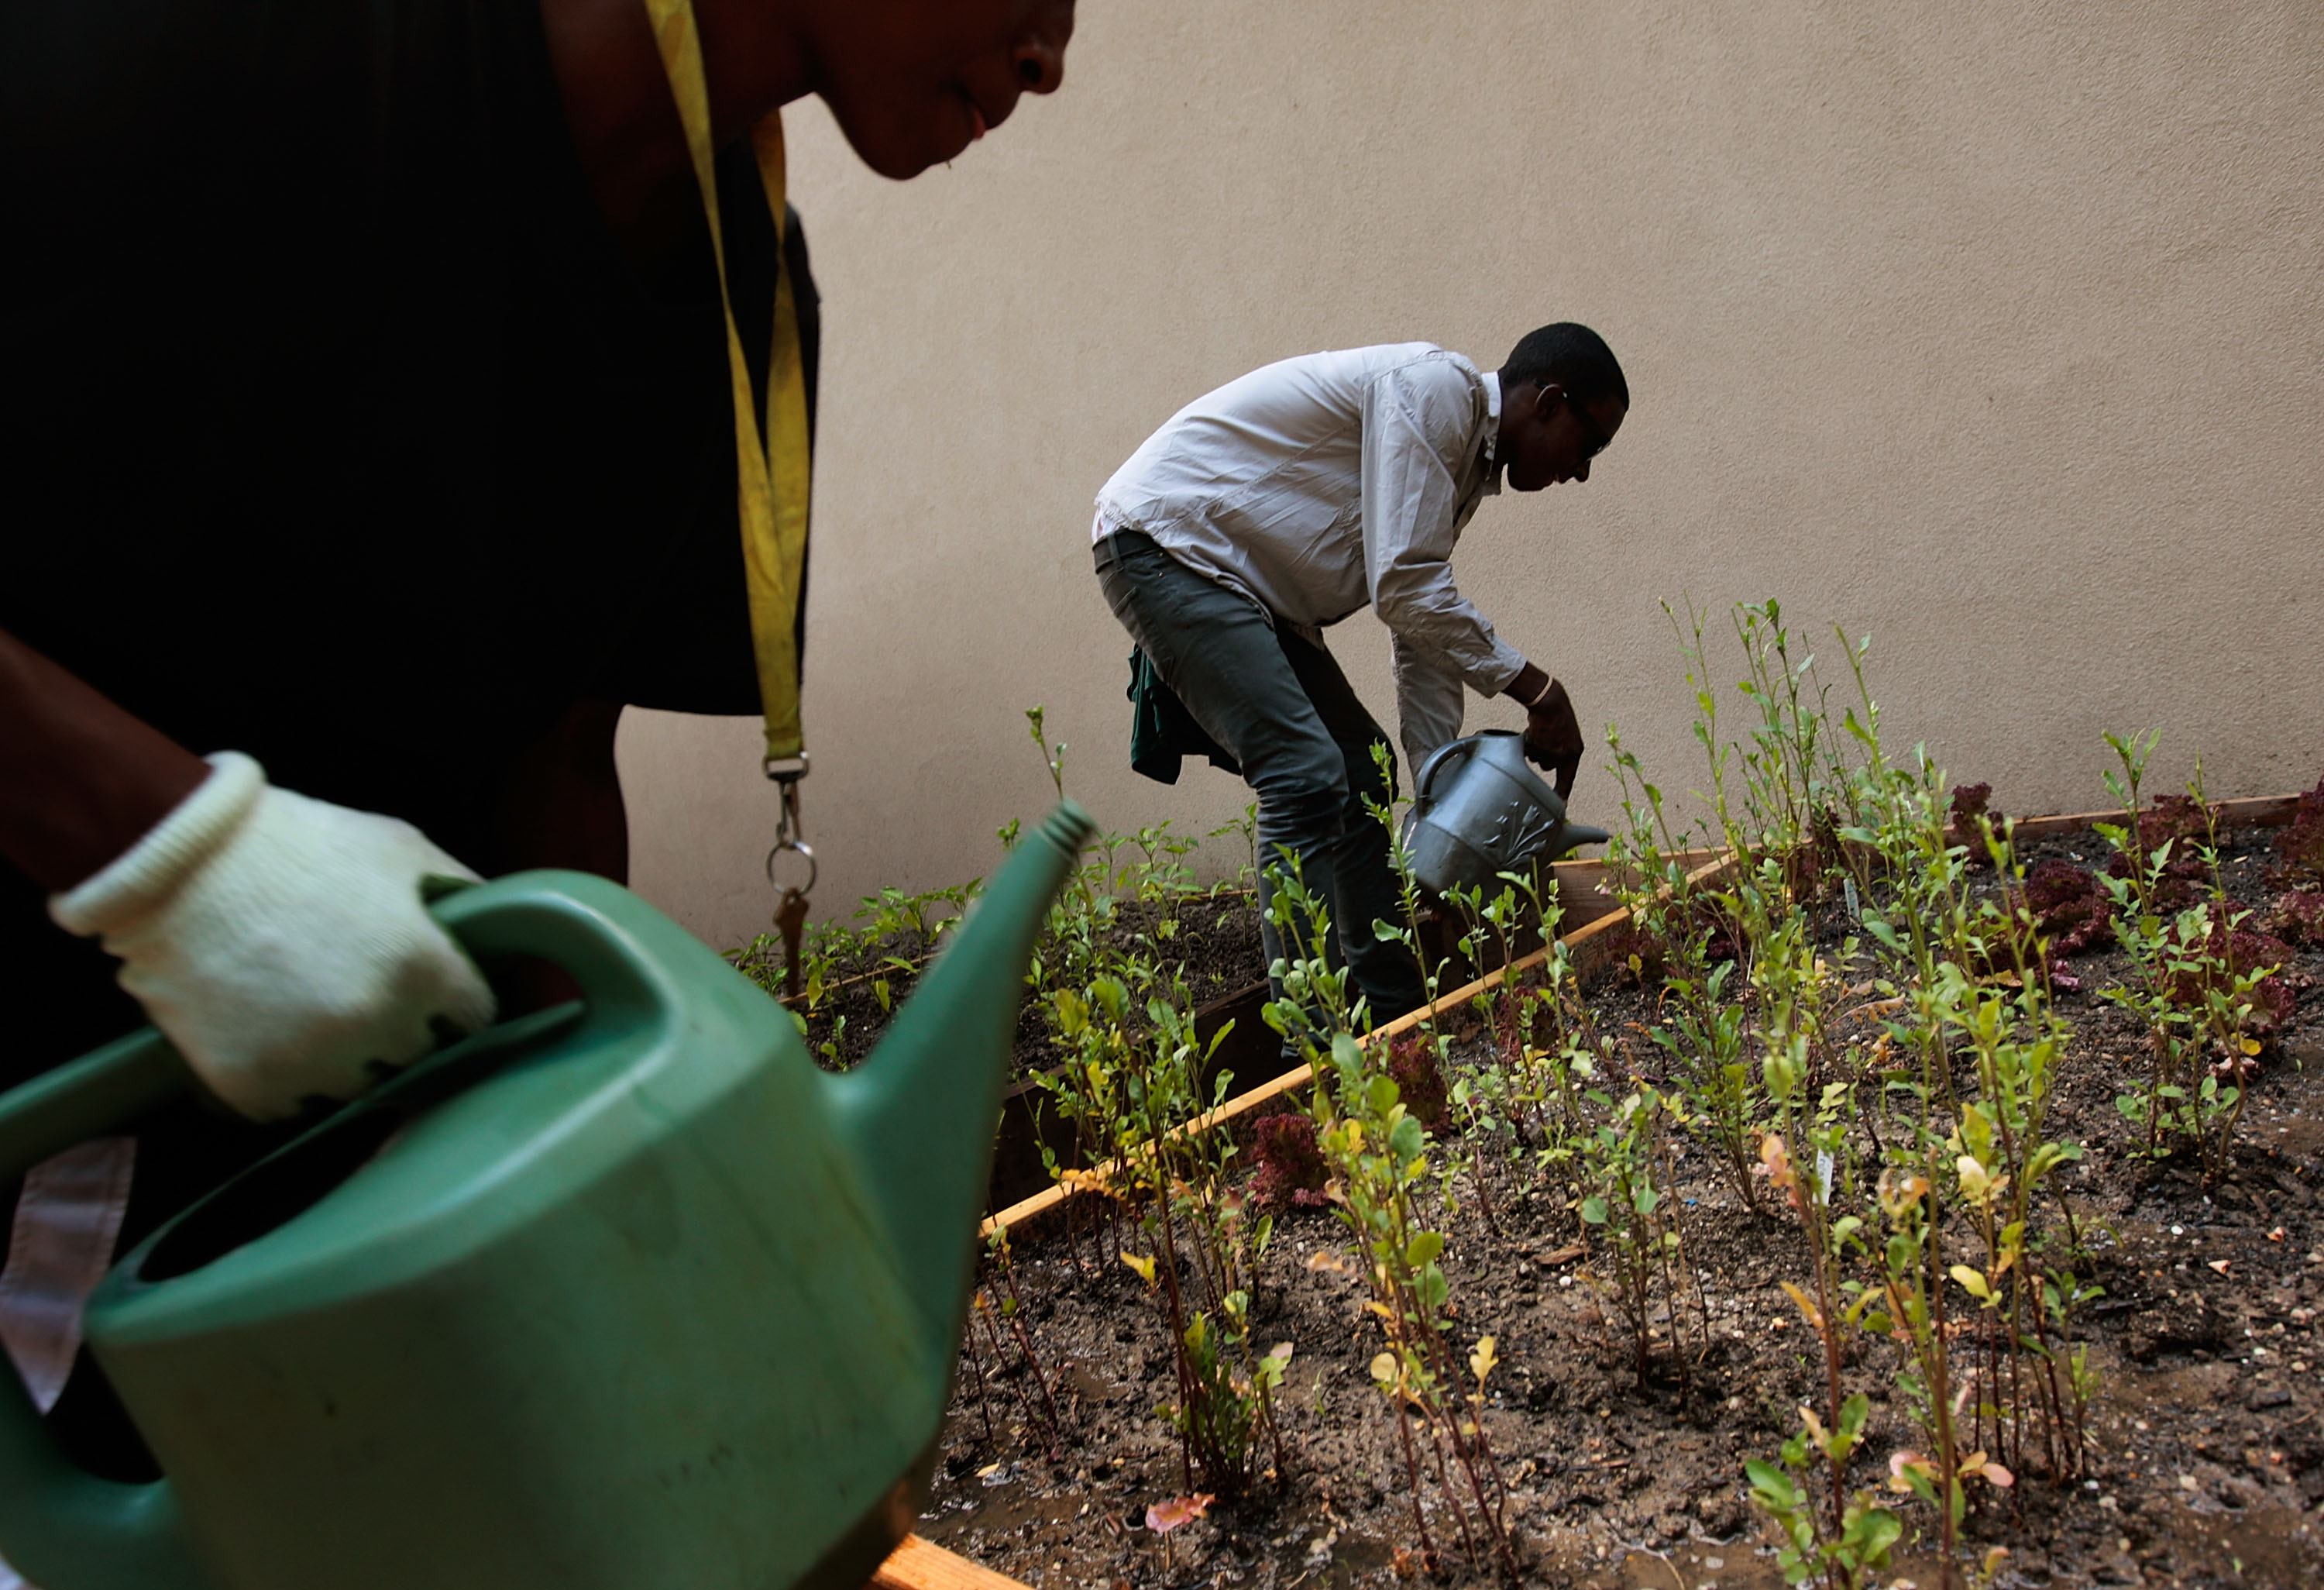 Two young Black men use watering cans to water small green plants growing from a plot of dirt.